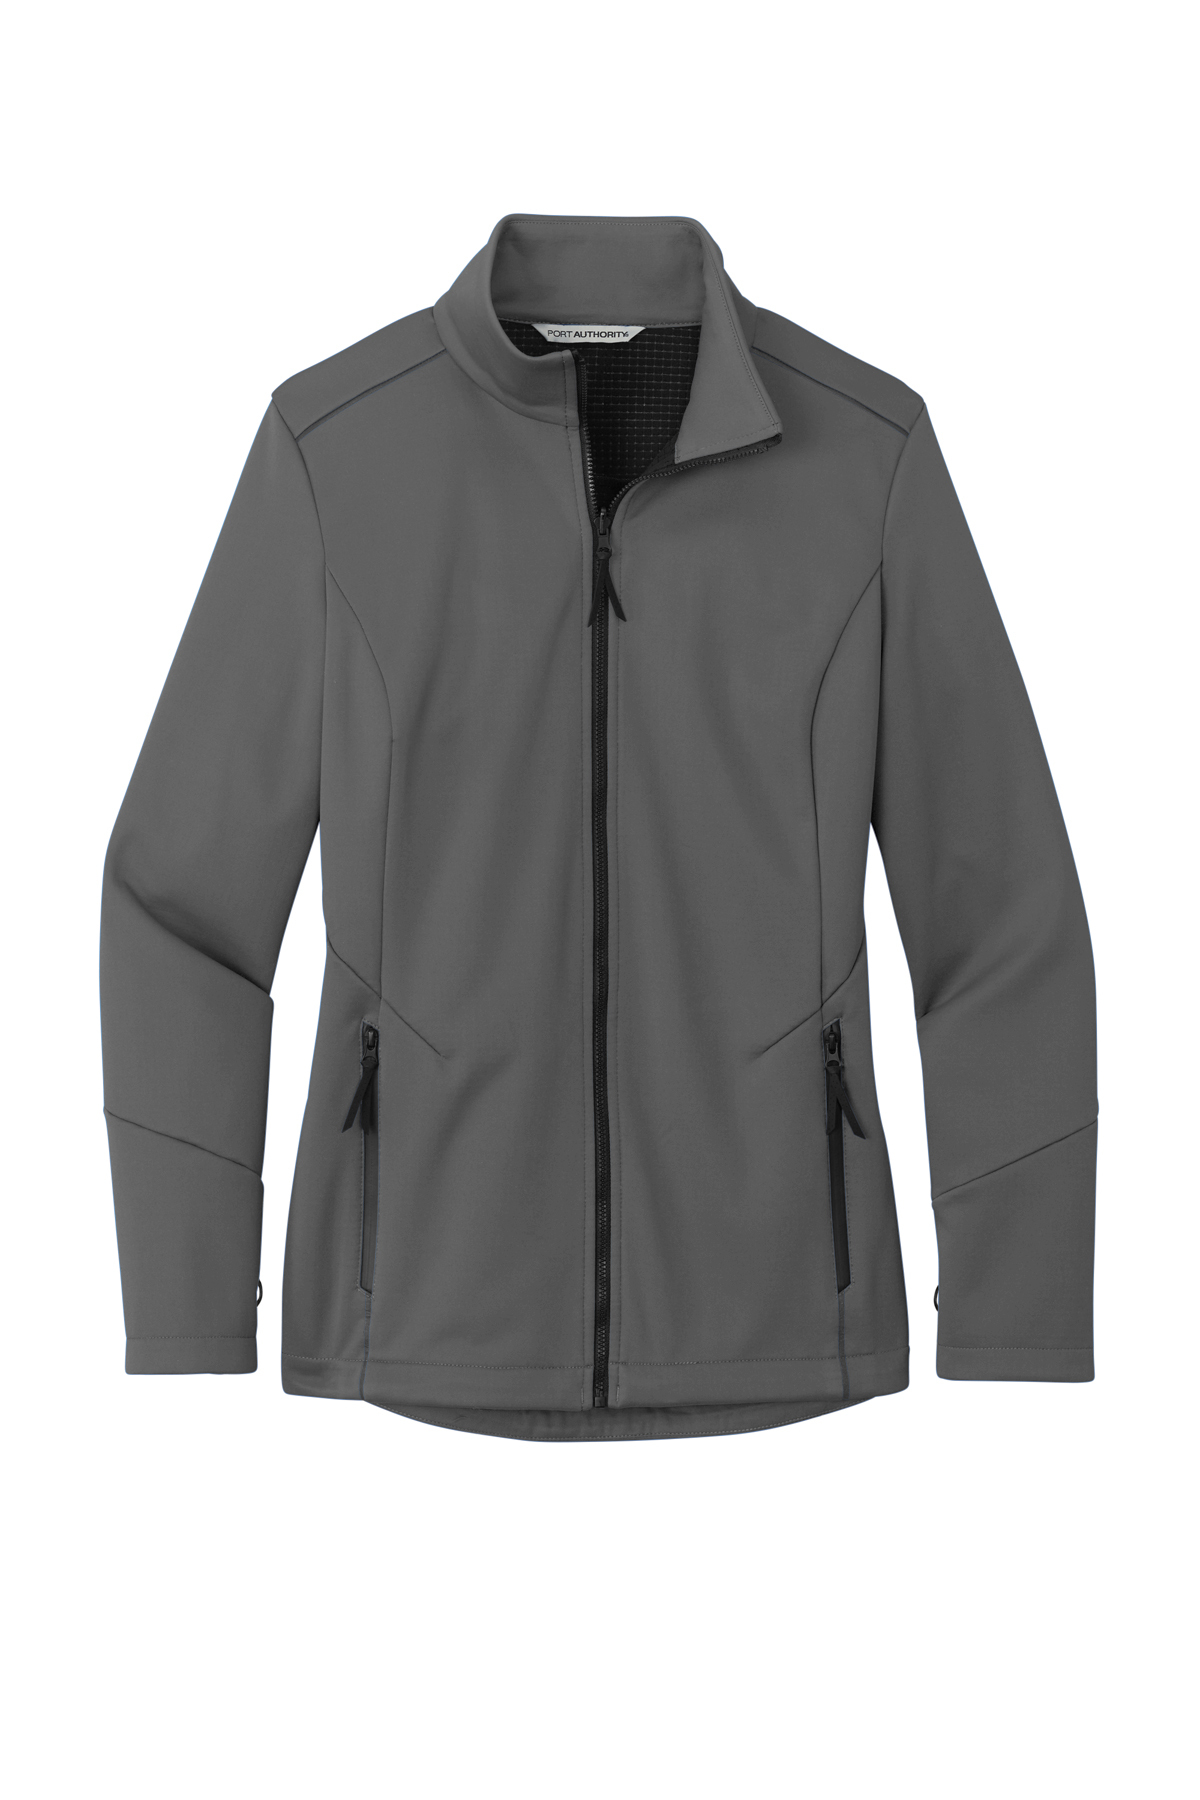 Port Authority Ladies Collective Tech Soft Shell Jacket | Product ...